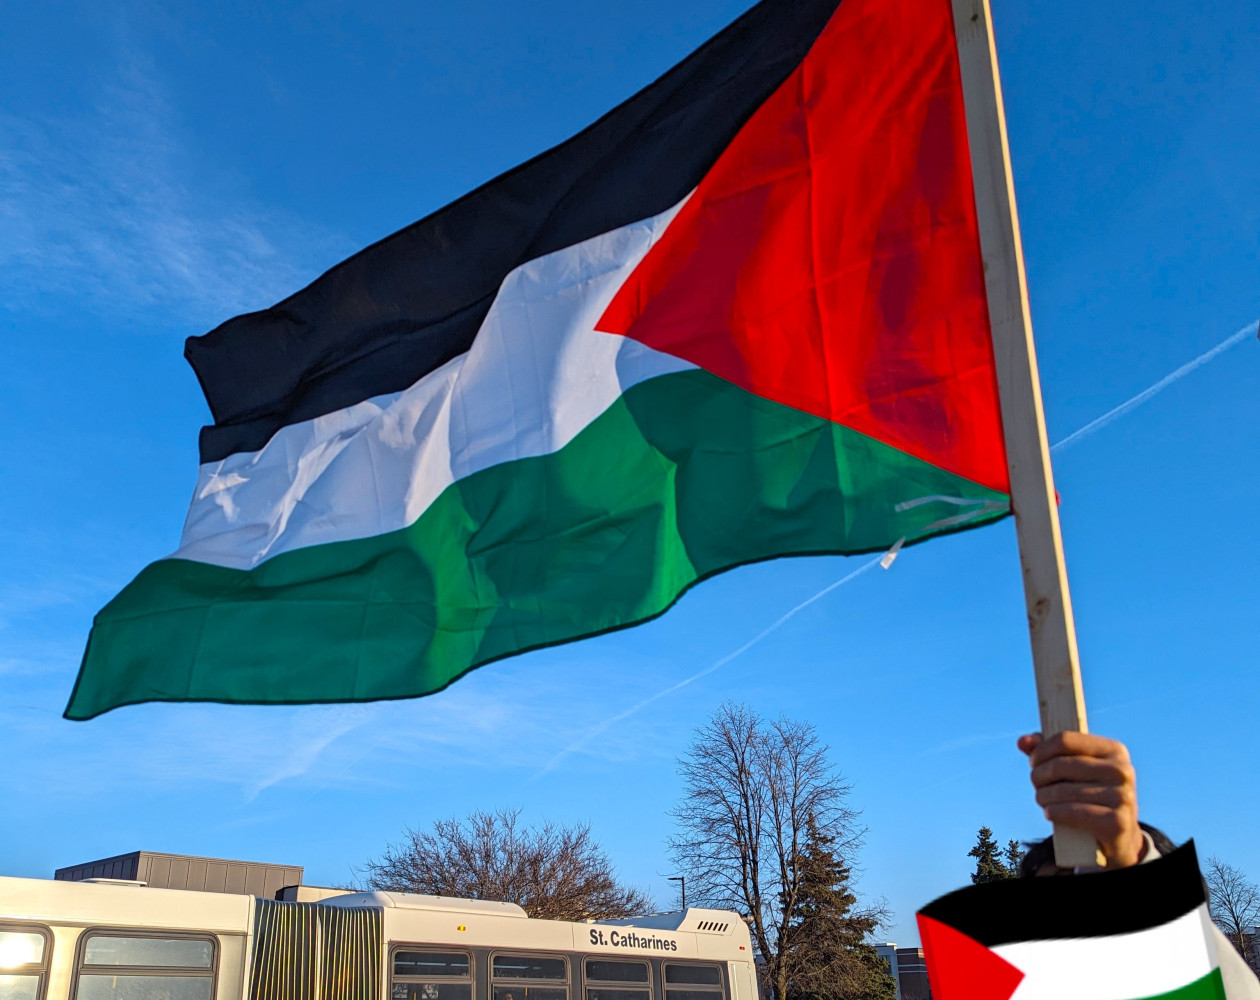 After blocking delegations, Niagara councillors sparked months-long feud with local Palestinian community  